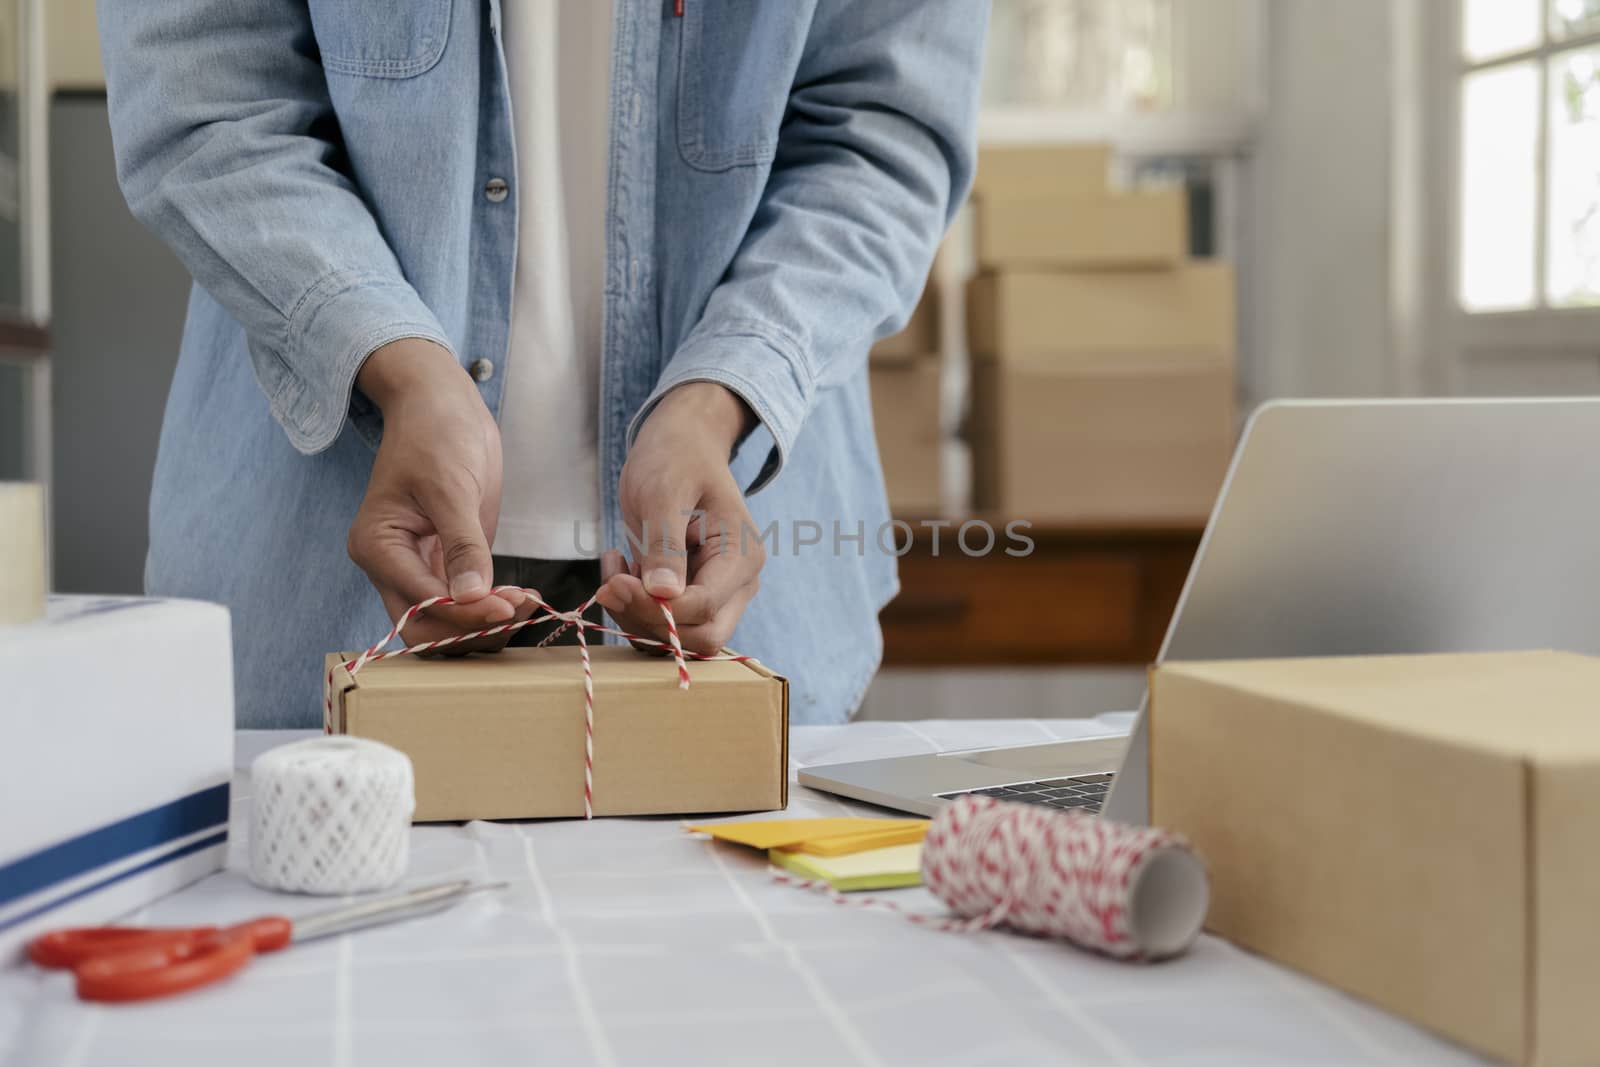 Online small business owner. Young startup entrepreneur online small business owner working at home, packaging and delivery situation. 